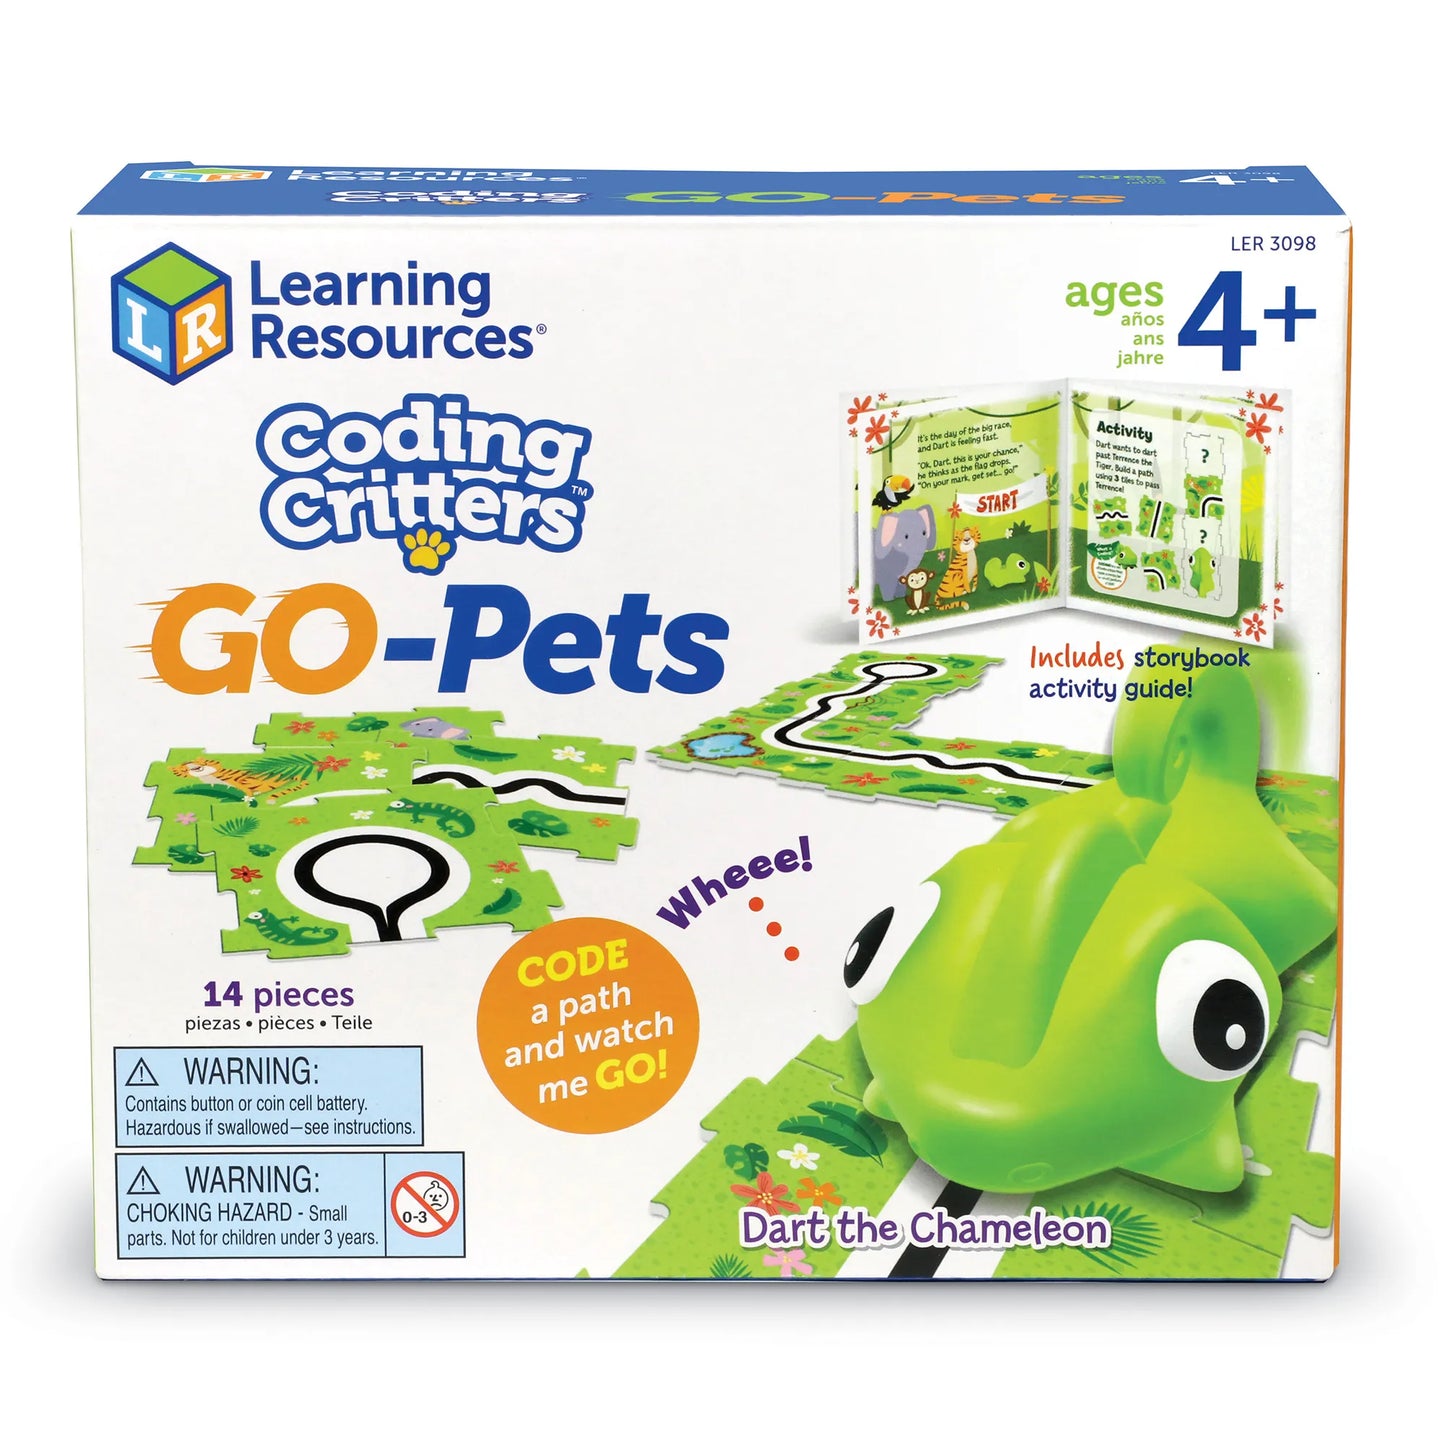 Learning Resources Coding Critters Go-Pets Dart the Chameleon